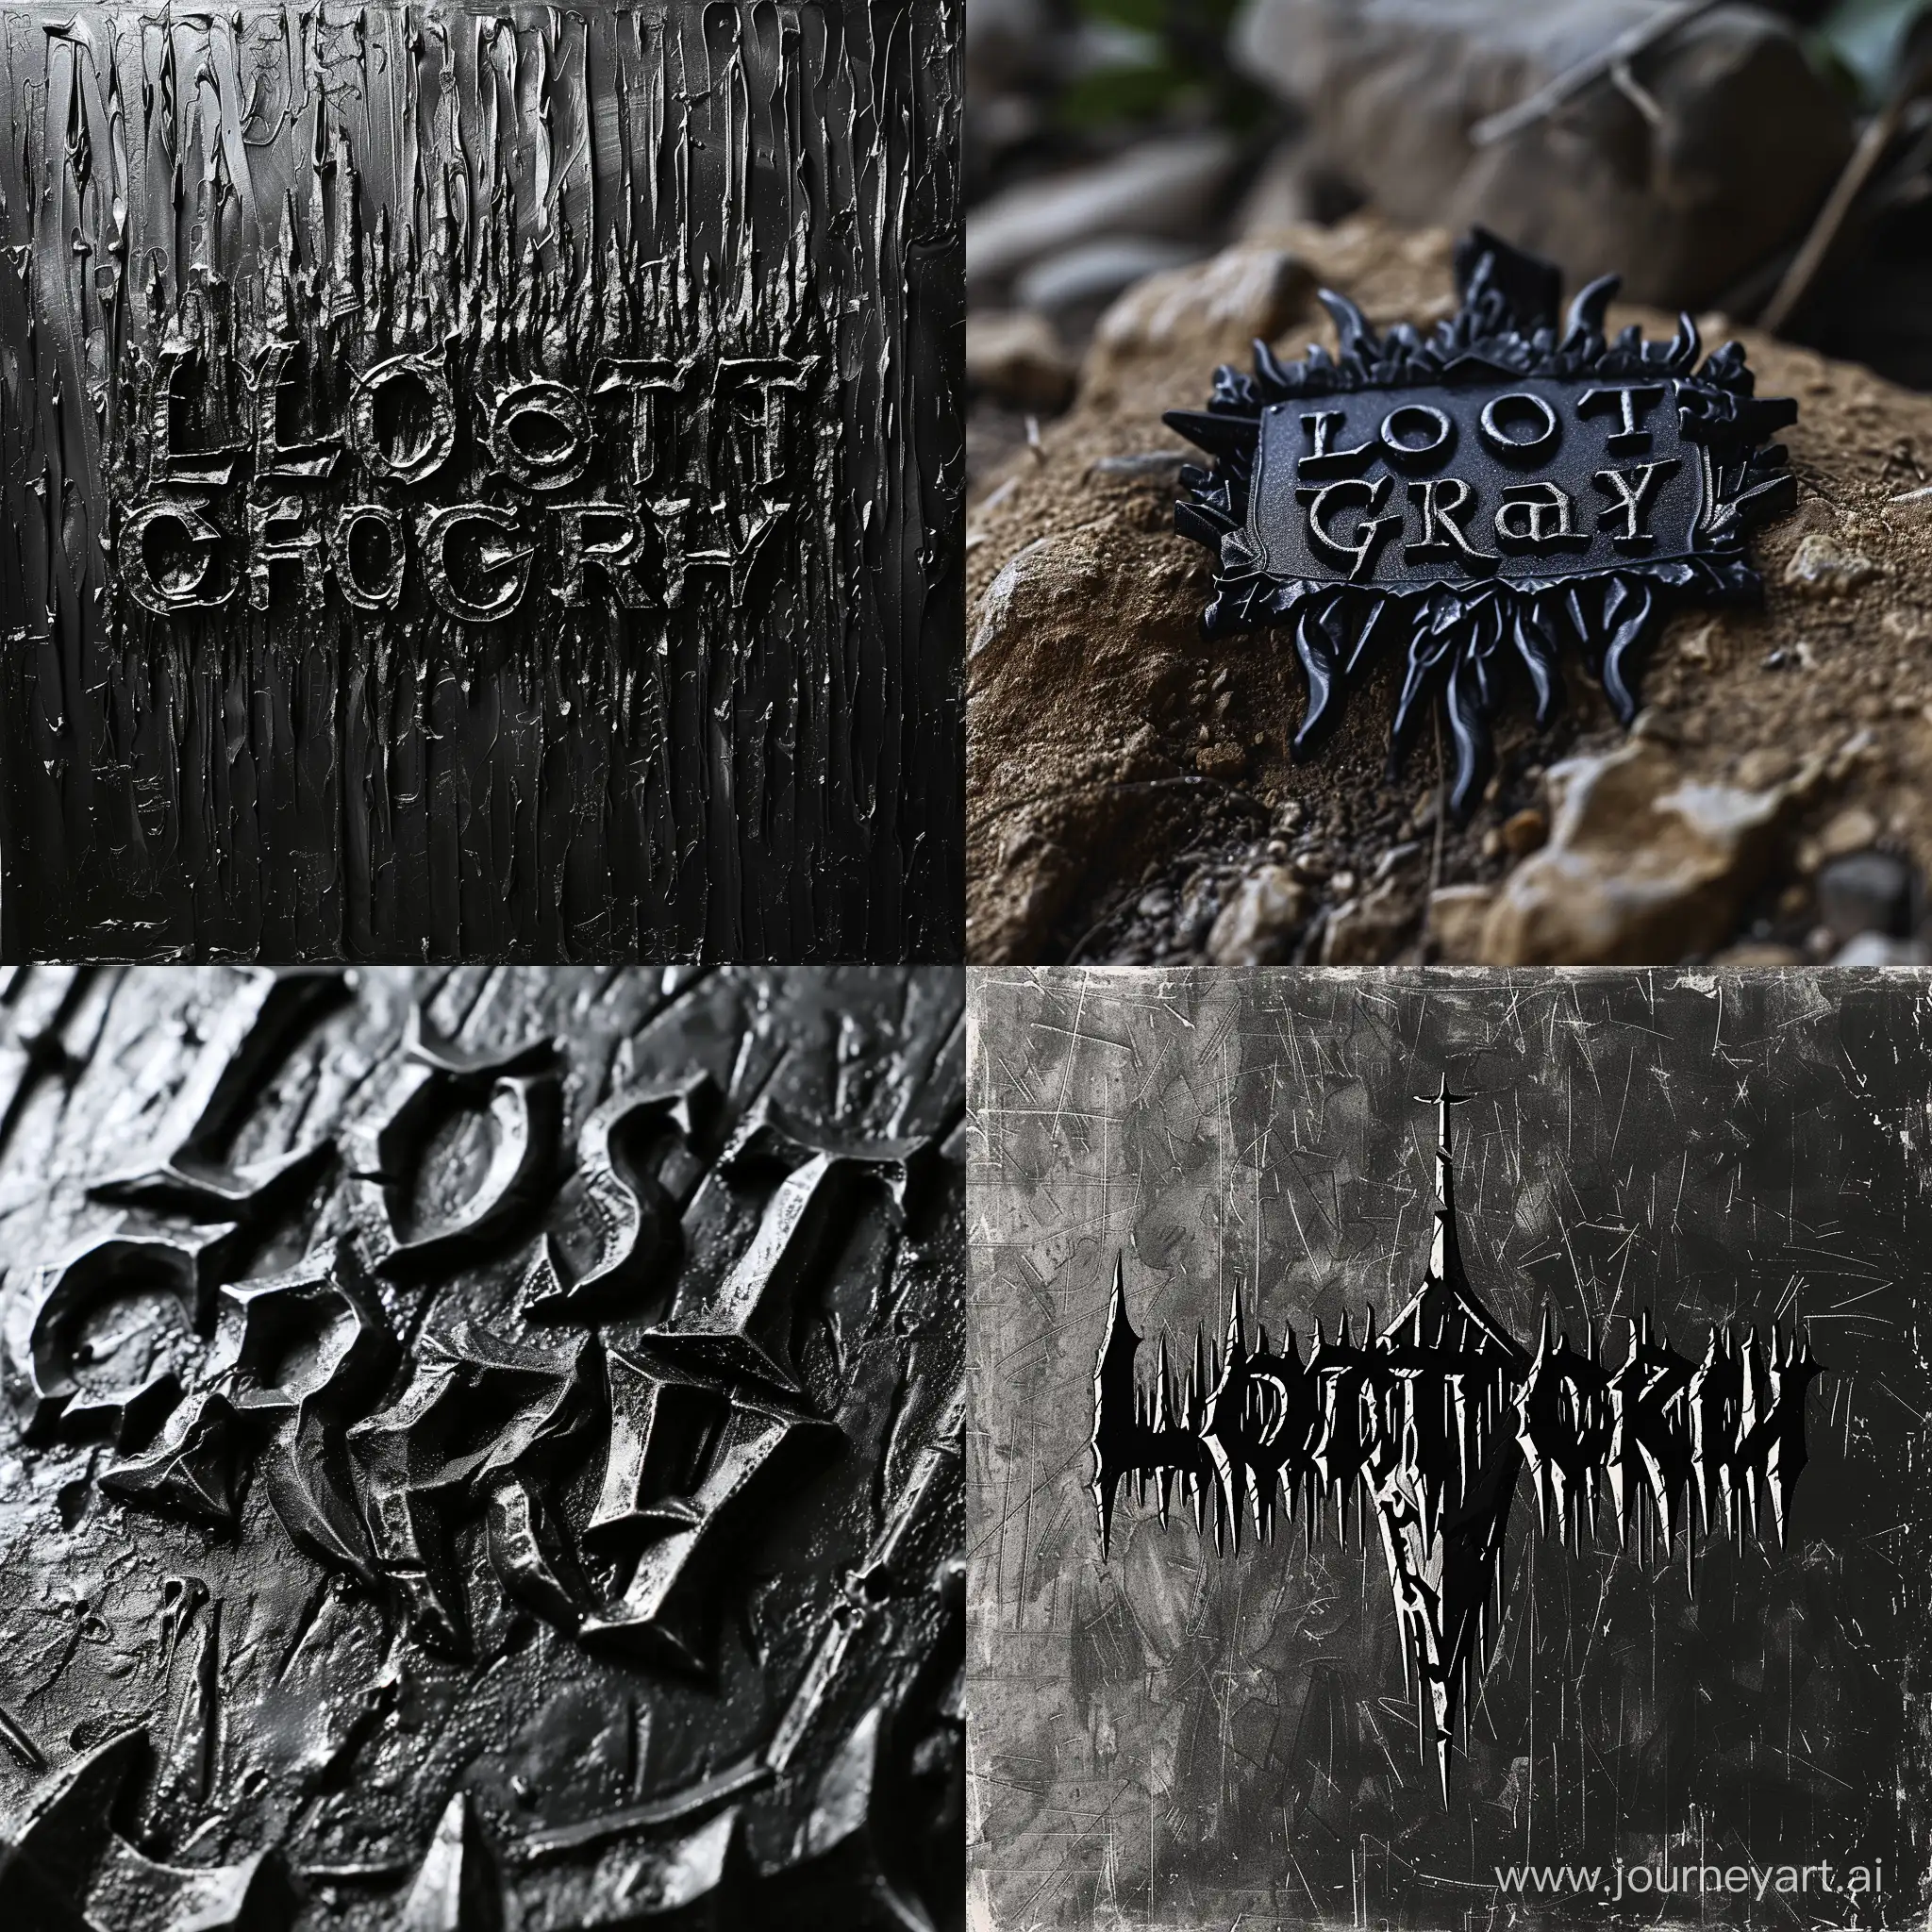 Dark-and-Mysterious-Black-Metal-Inscription-Lost-Cry